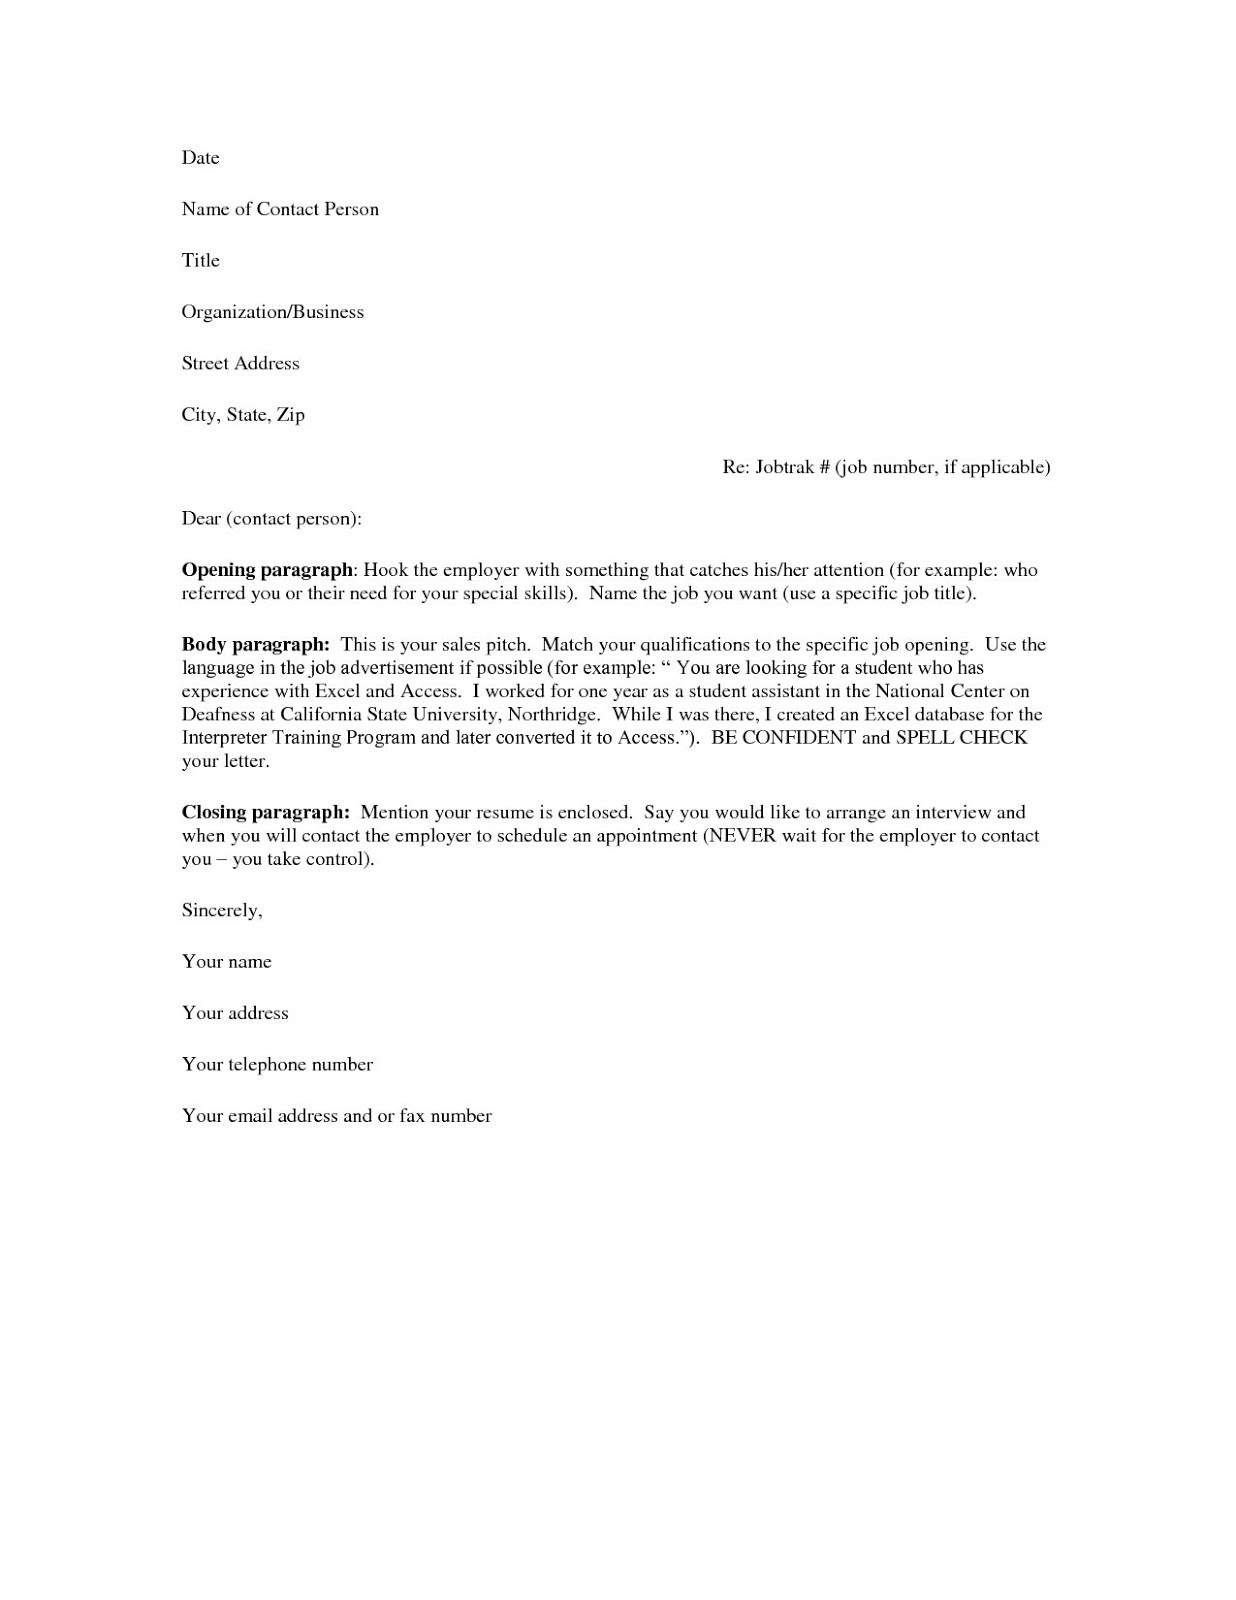 Samples Of Resumes and Cover Letters Free Free Cover Letter Samples for Resumes